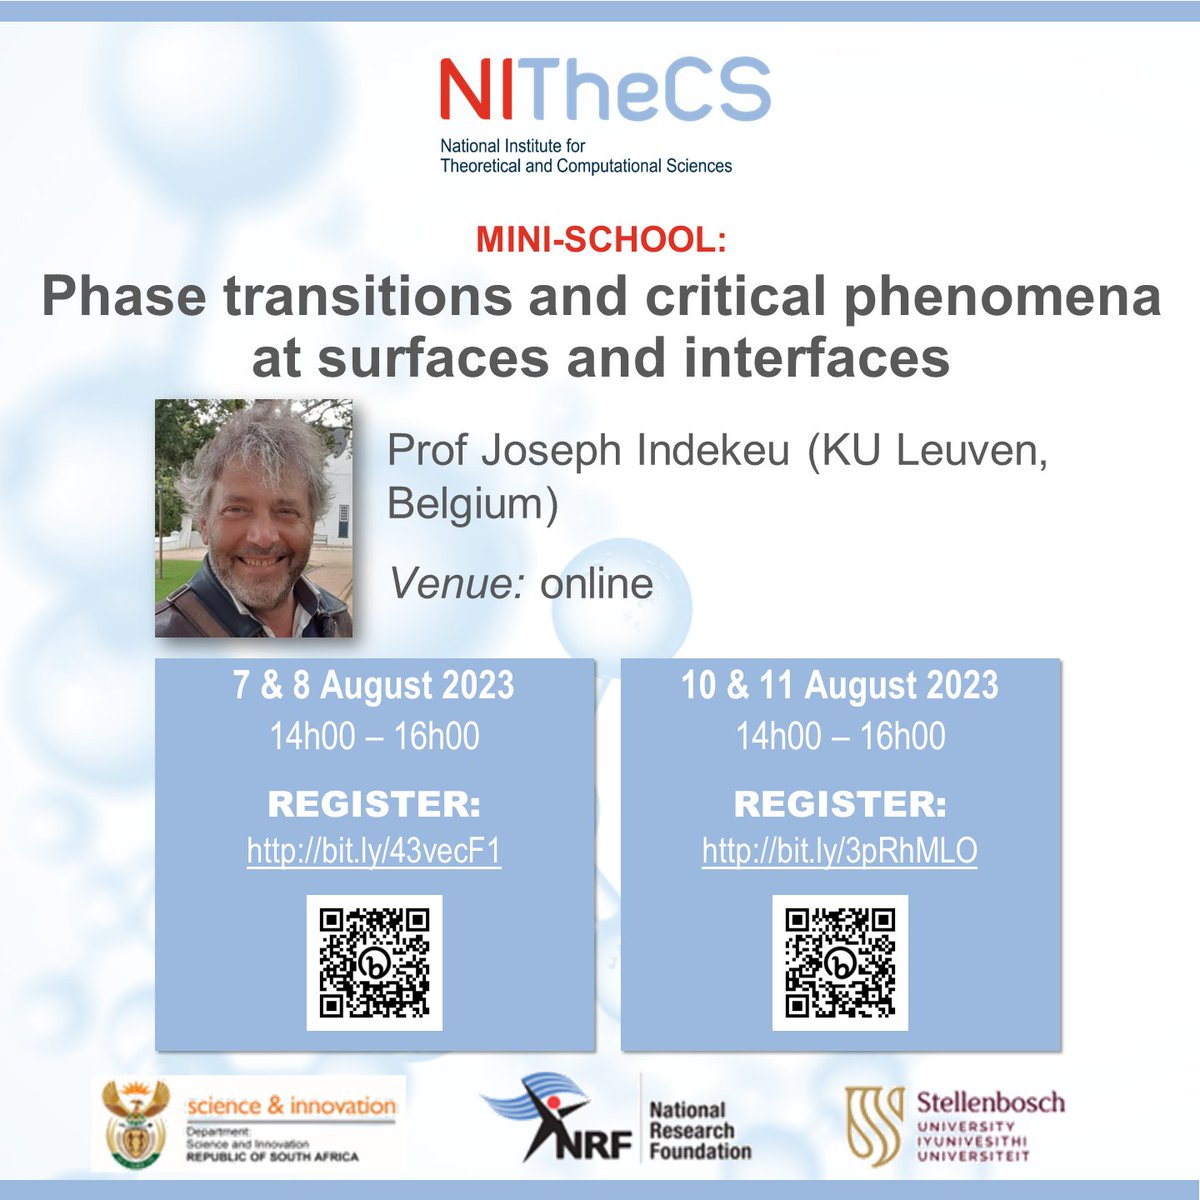 NITheCS Mini-school: 'Phase transitions and critical phenomena at surfaces and interfaces' by Prof Joseph Indekeu (KU Leuven, Belgium) - 7, 8, 10 & 11 August @ 14h00 - 16h00. Attend online. Register now. mailchi.mp/nithecs/aug202… #physics #condensedmatter #quantum #wettingphenomena